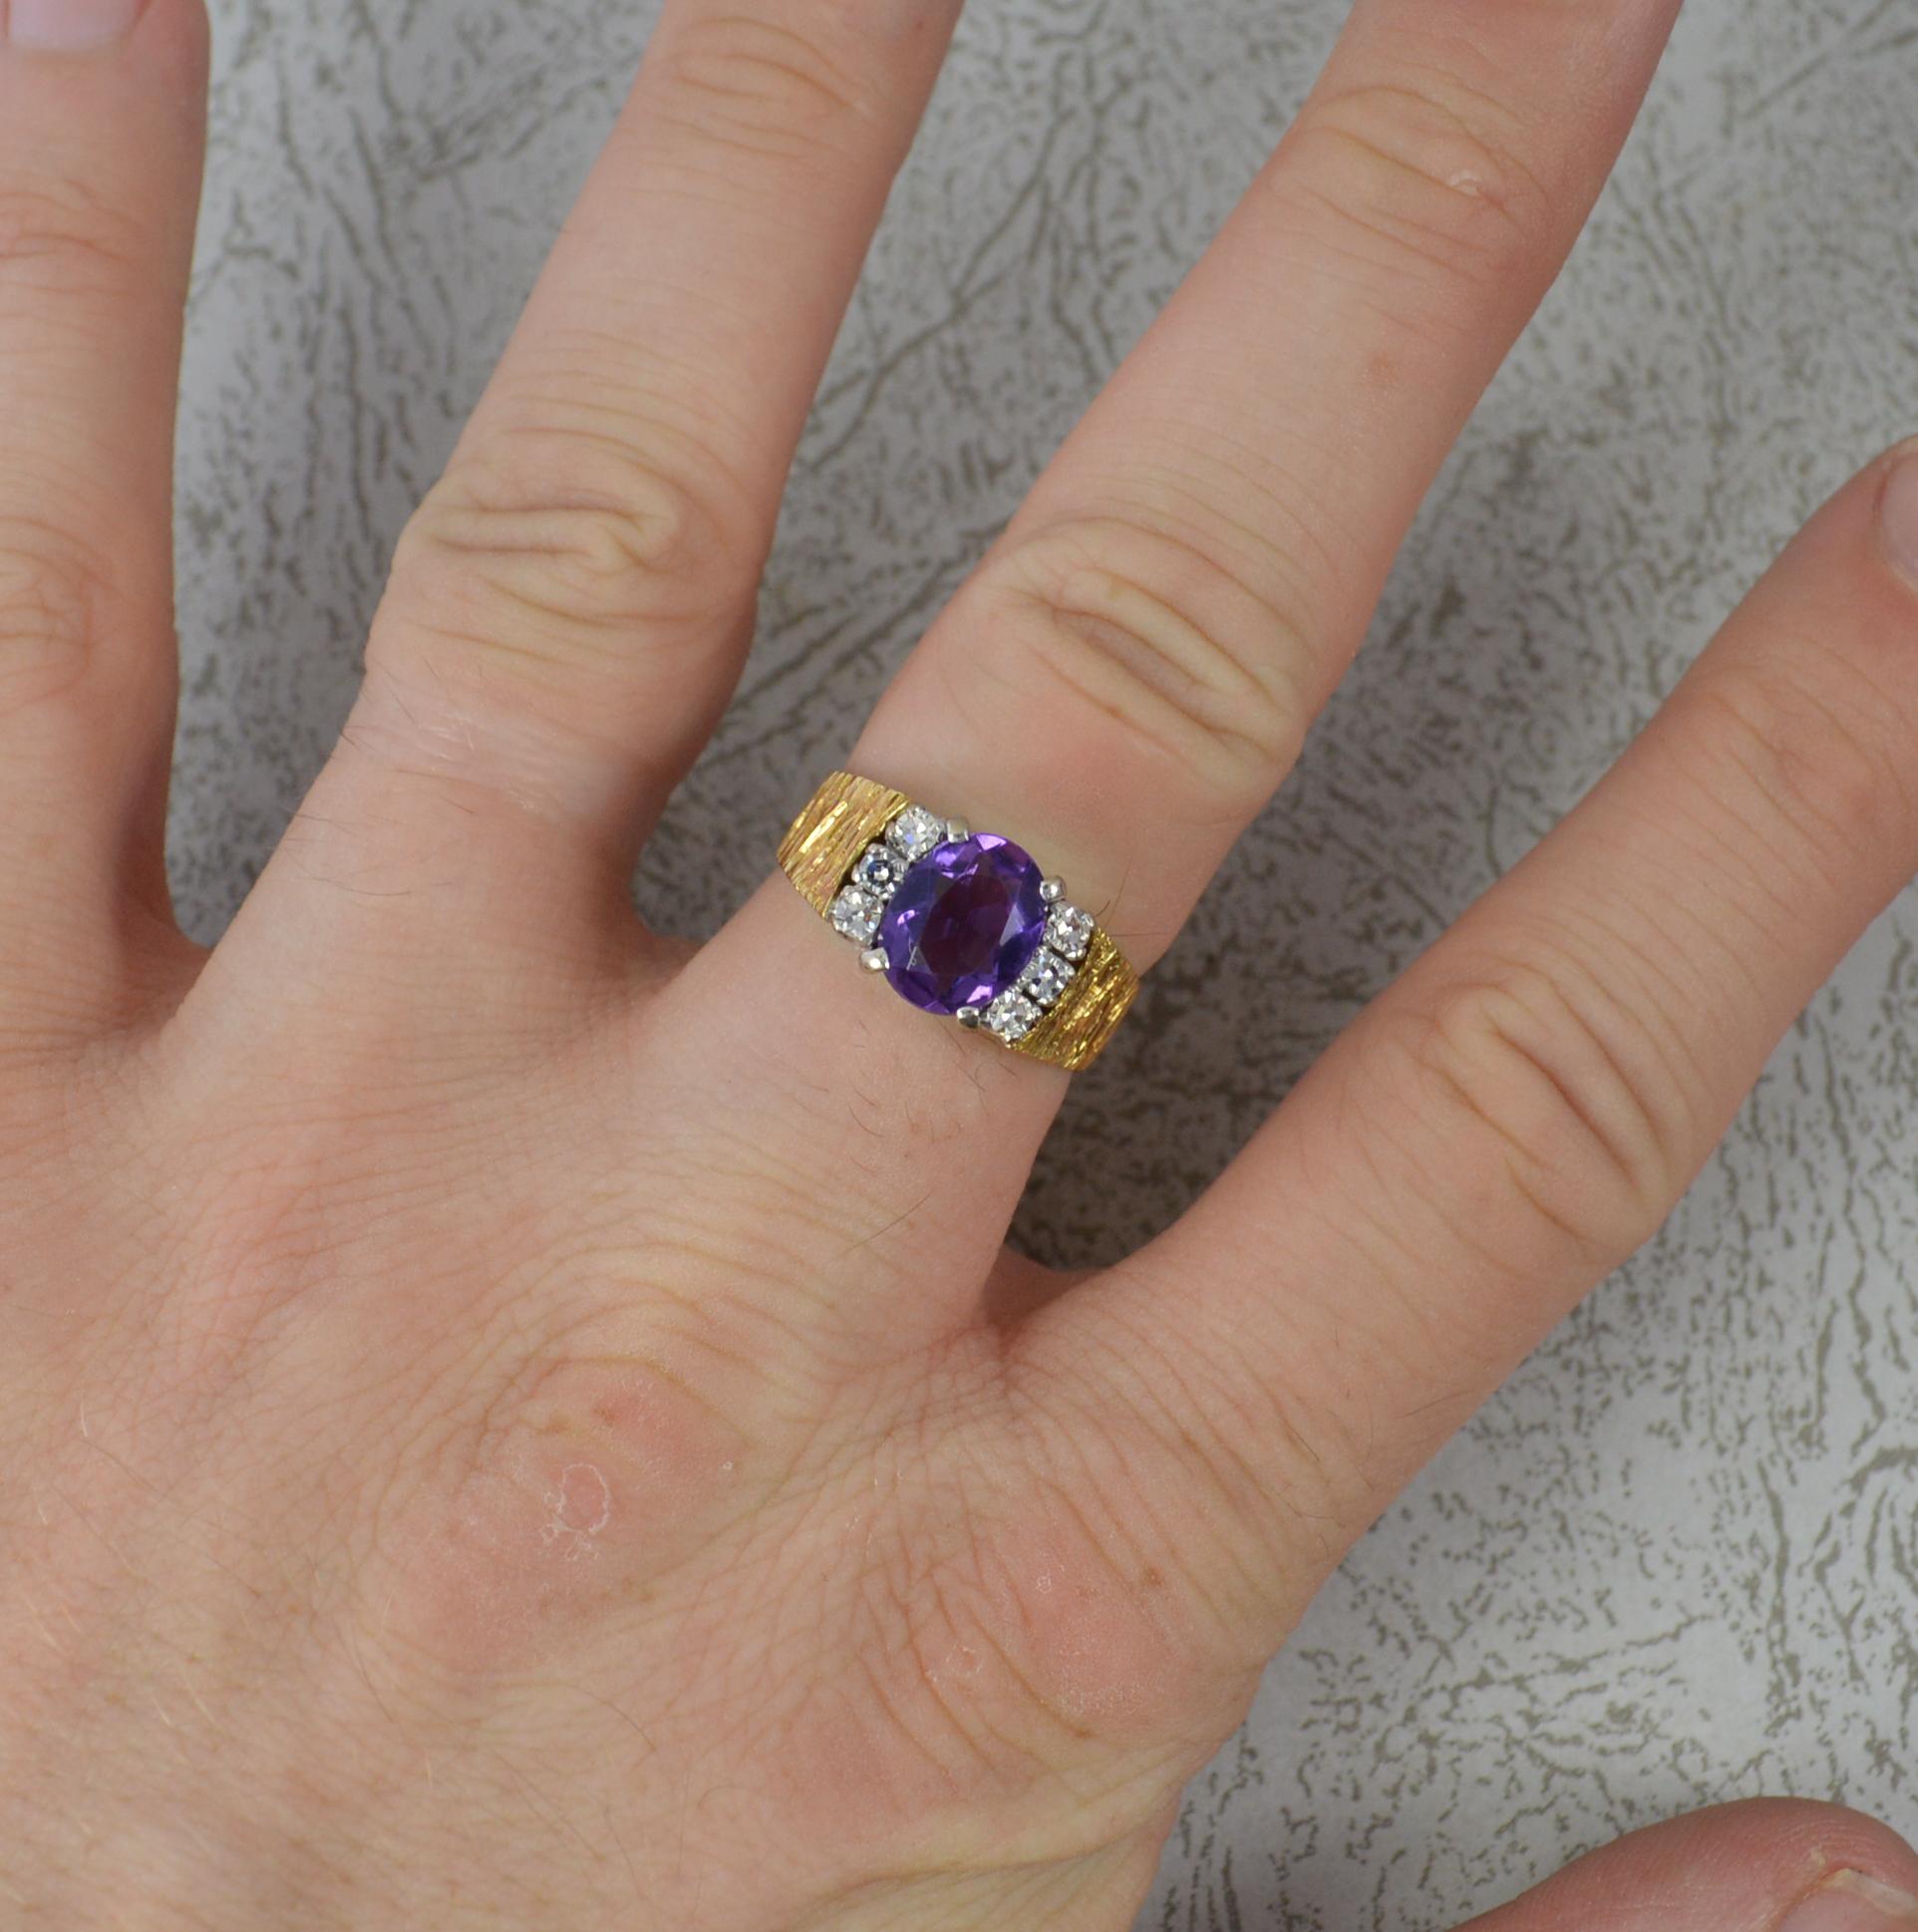 A beautiful Amethyst and Diamond ring.
Solid 18 carat yellow gold shank with bark finish to shoulders and platinum claw settings for the stones.
7mm x 9mm oval cut amethyst with three round, eight cut diamonds to each side.
A heavy vintage